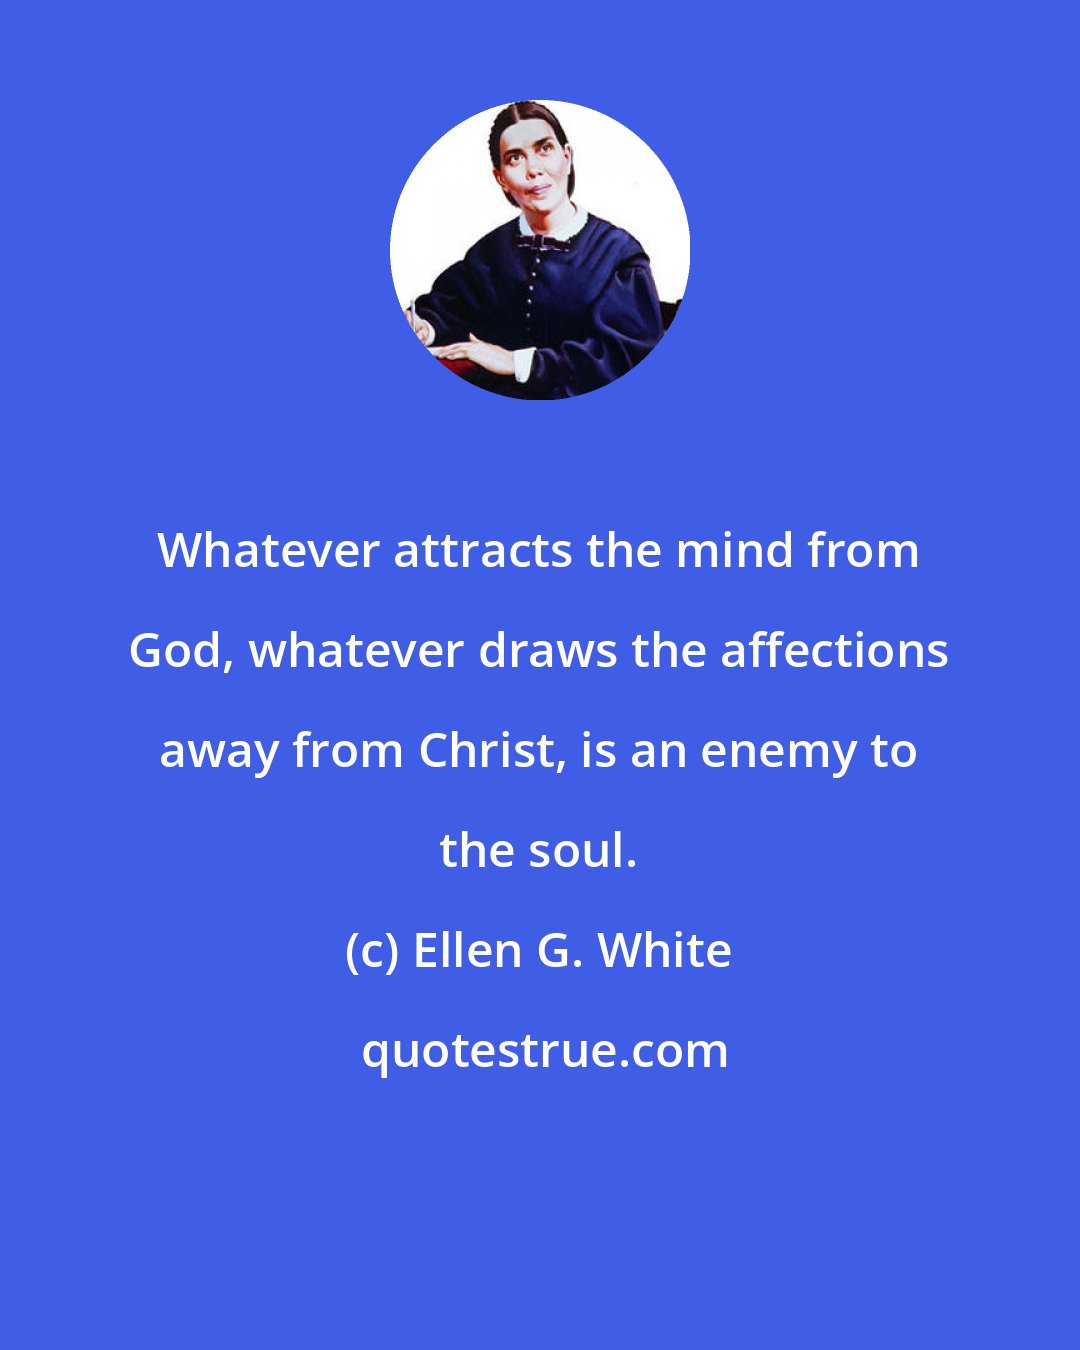 Ellen G. White: Whatever attracts the mind from God, whatever draws the affections away from Christ, is an enemy to the soul.